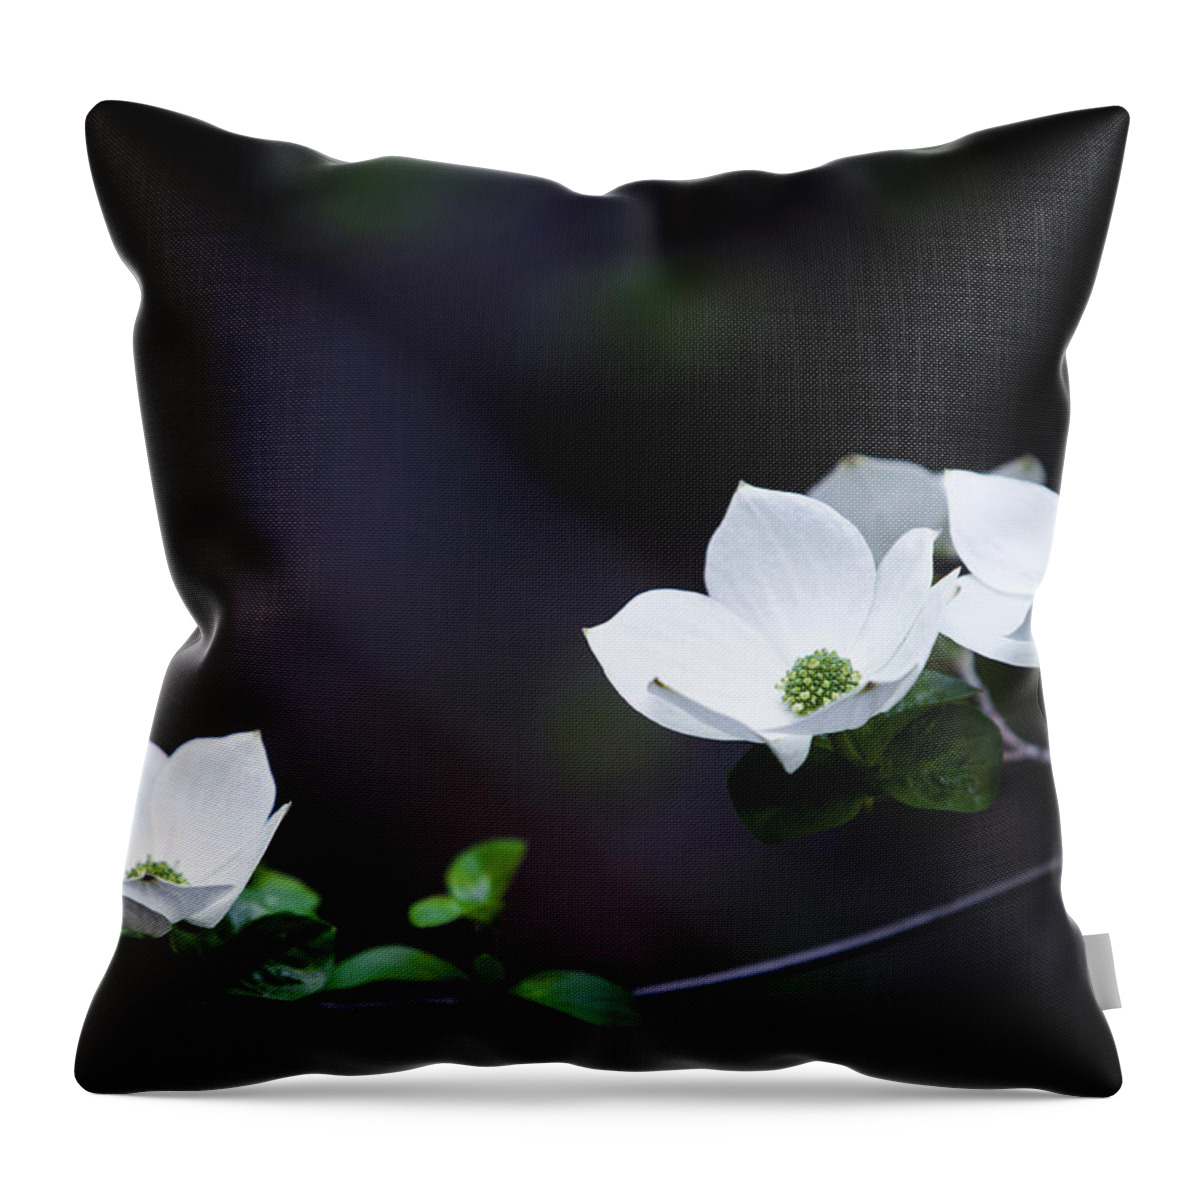 Yosemite Throw Pillow featuring the photograph Yosemite Dogwoods by Larry Marshall